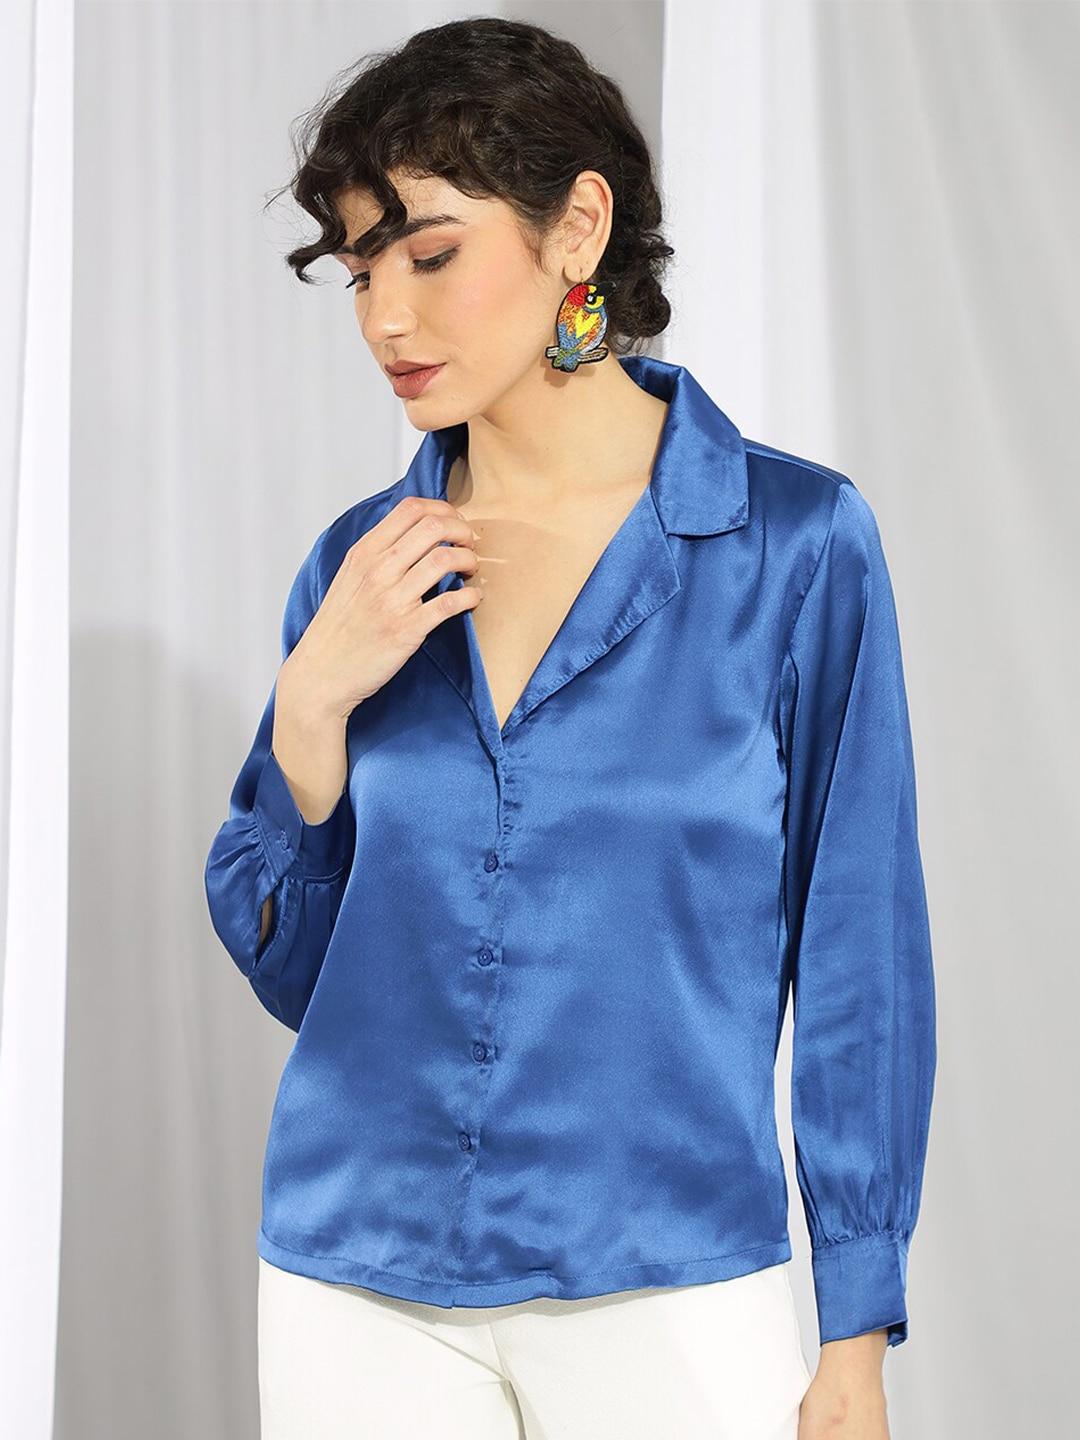 kotty blue cuffed sleeves satin shirt style top